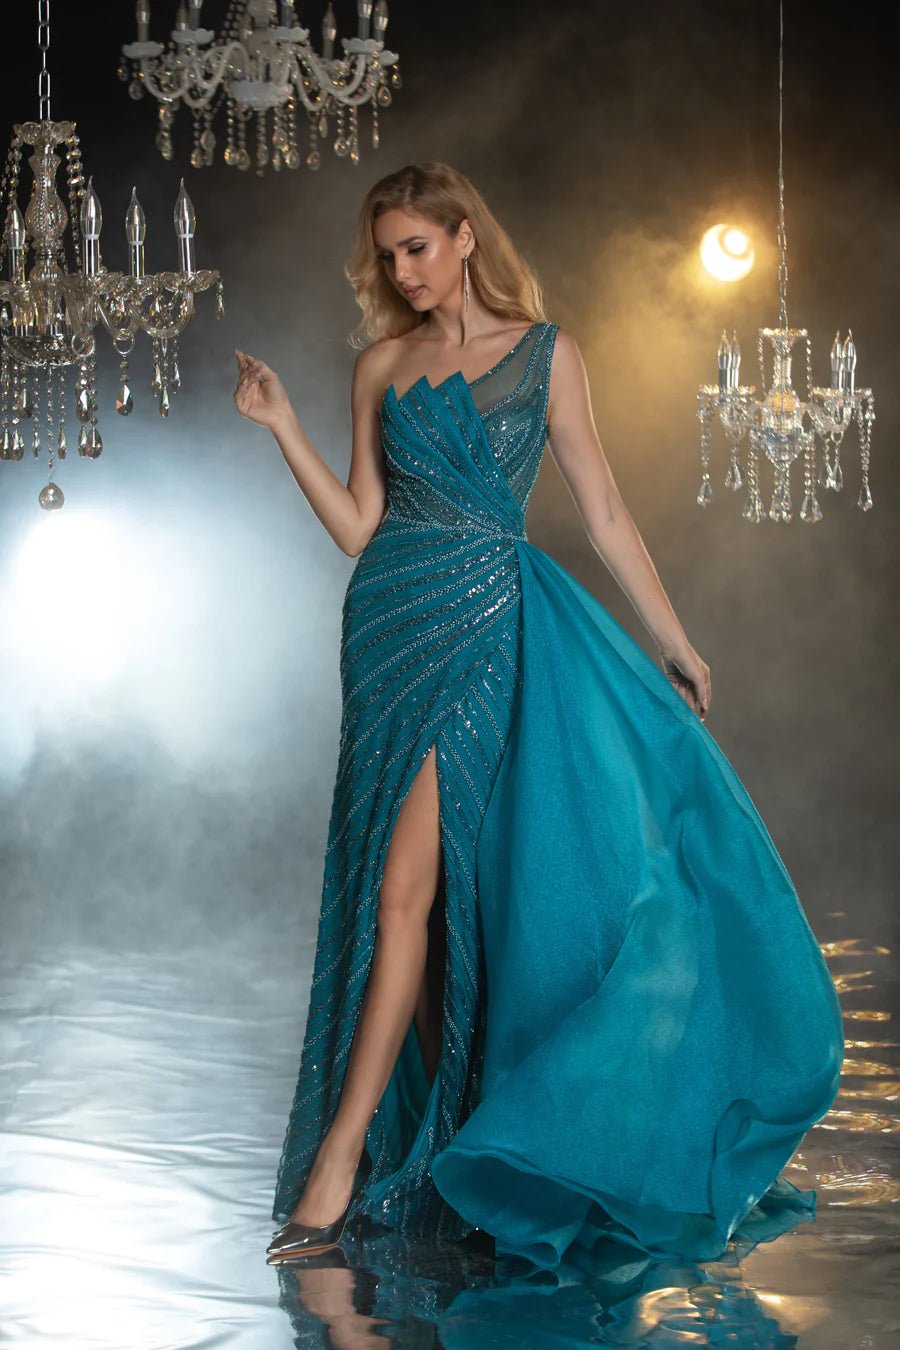 Gothic Turquoise Sequin Evening Gown with One Shoulder and Side Slit - Designer Sequin Gown and Glitter Dress Plus Size - WonderlandByLilian